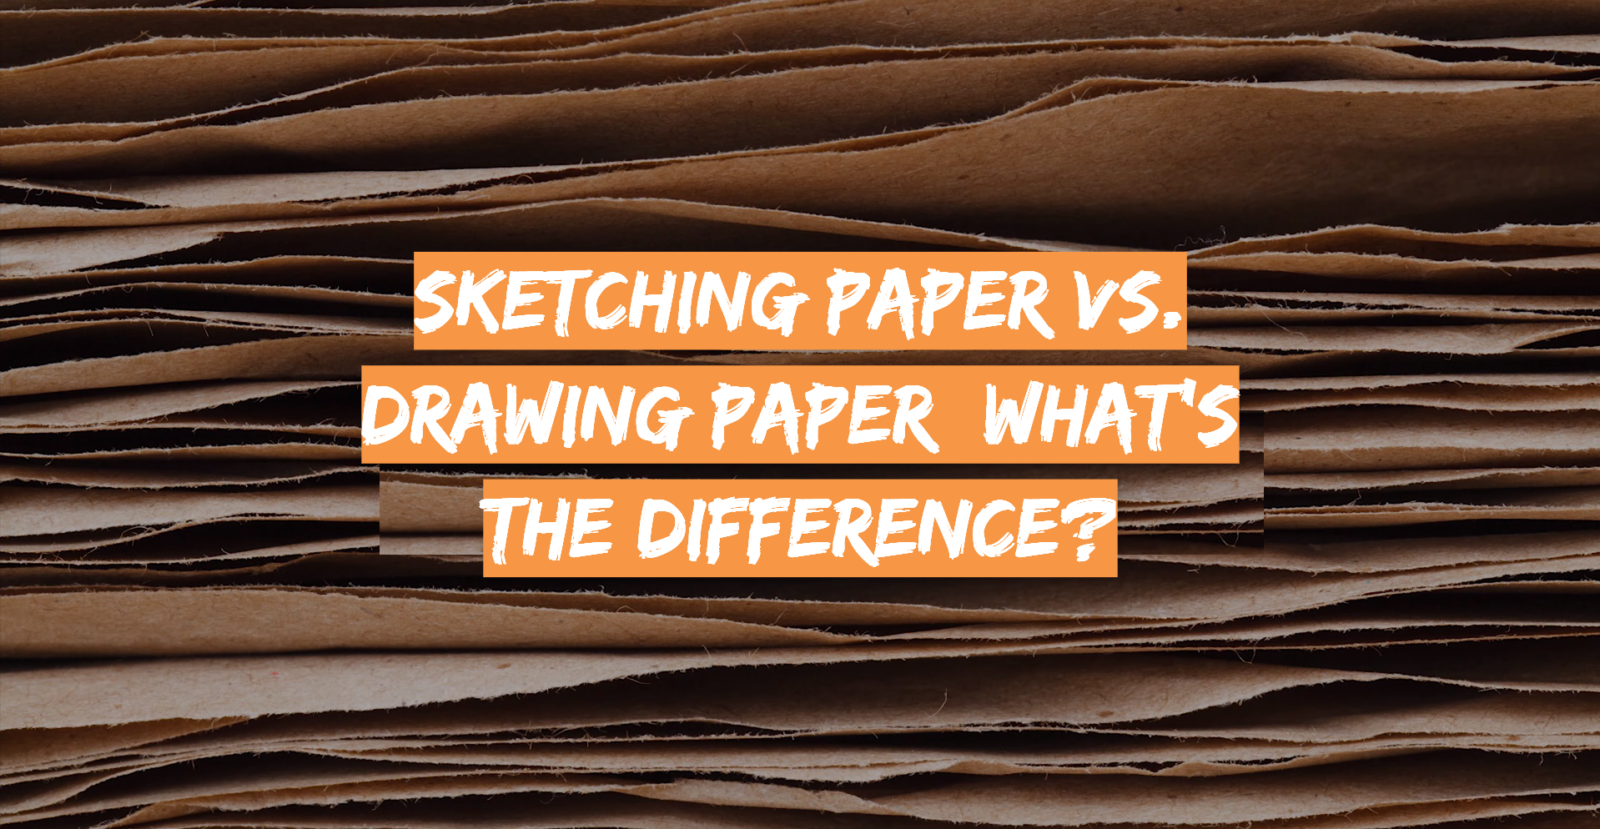 Sketching Paper vs. Drawing Paper: What’s the Difference?